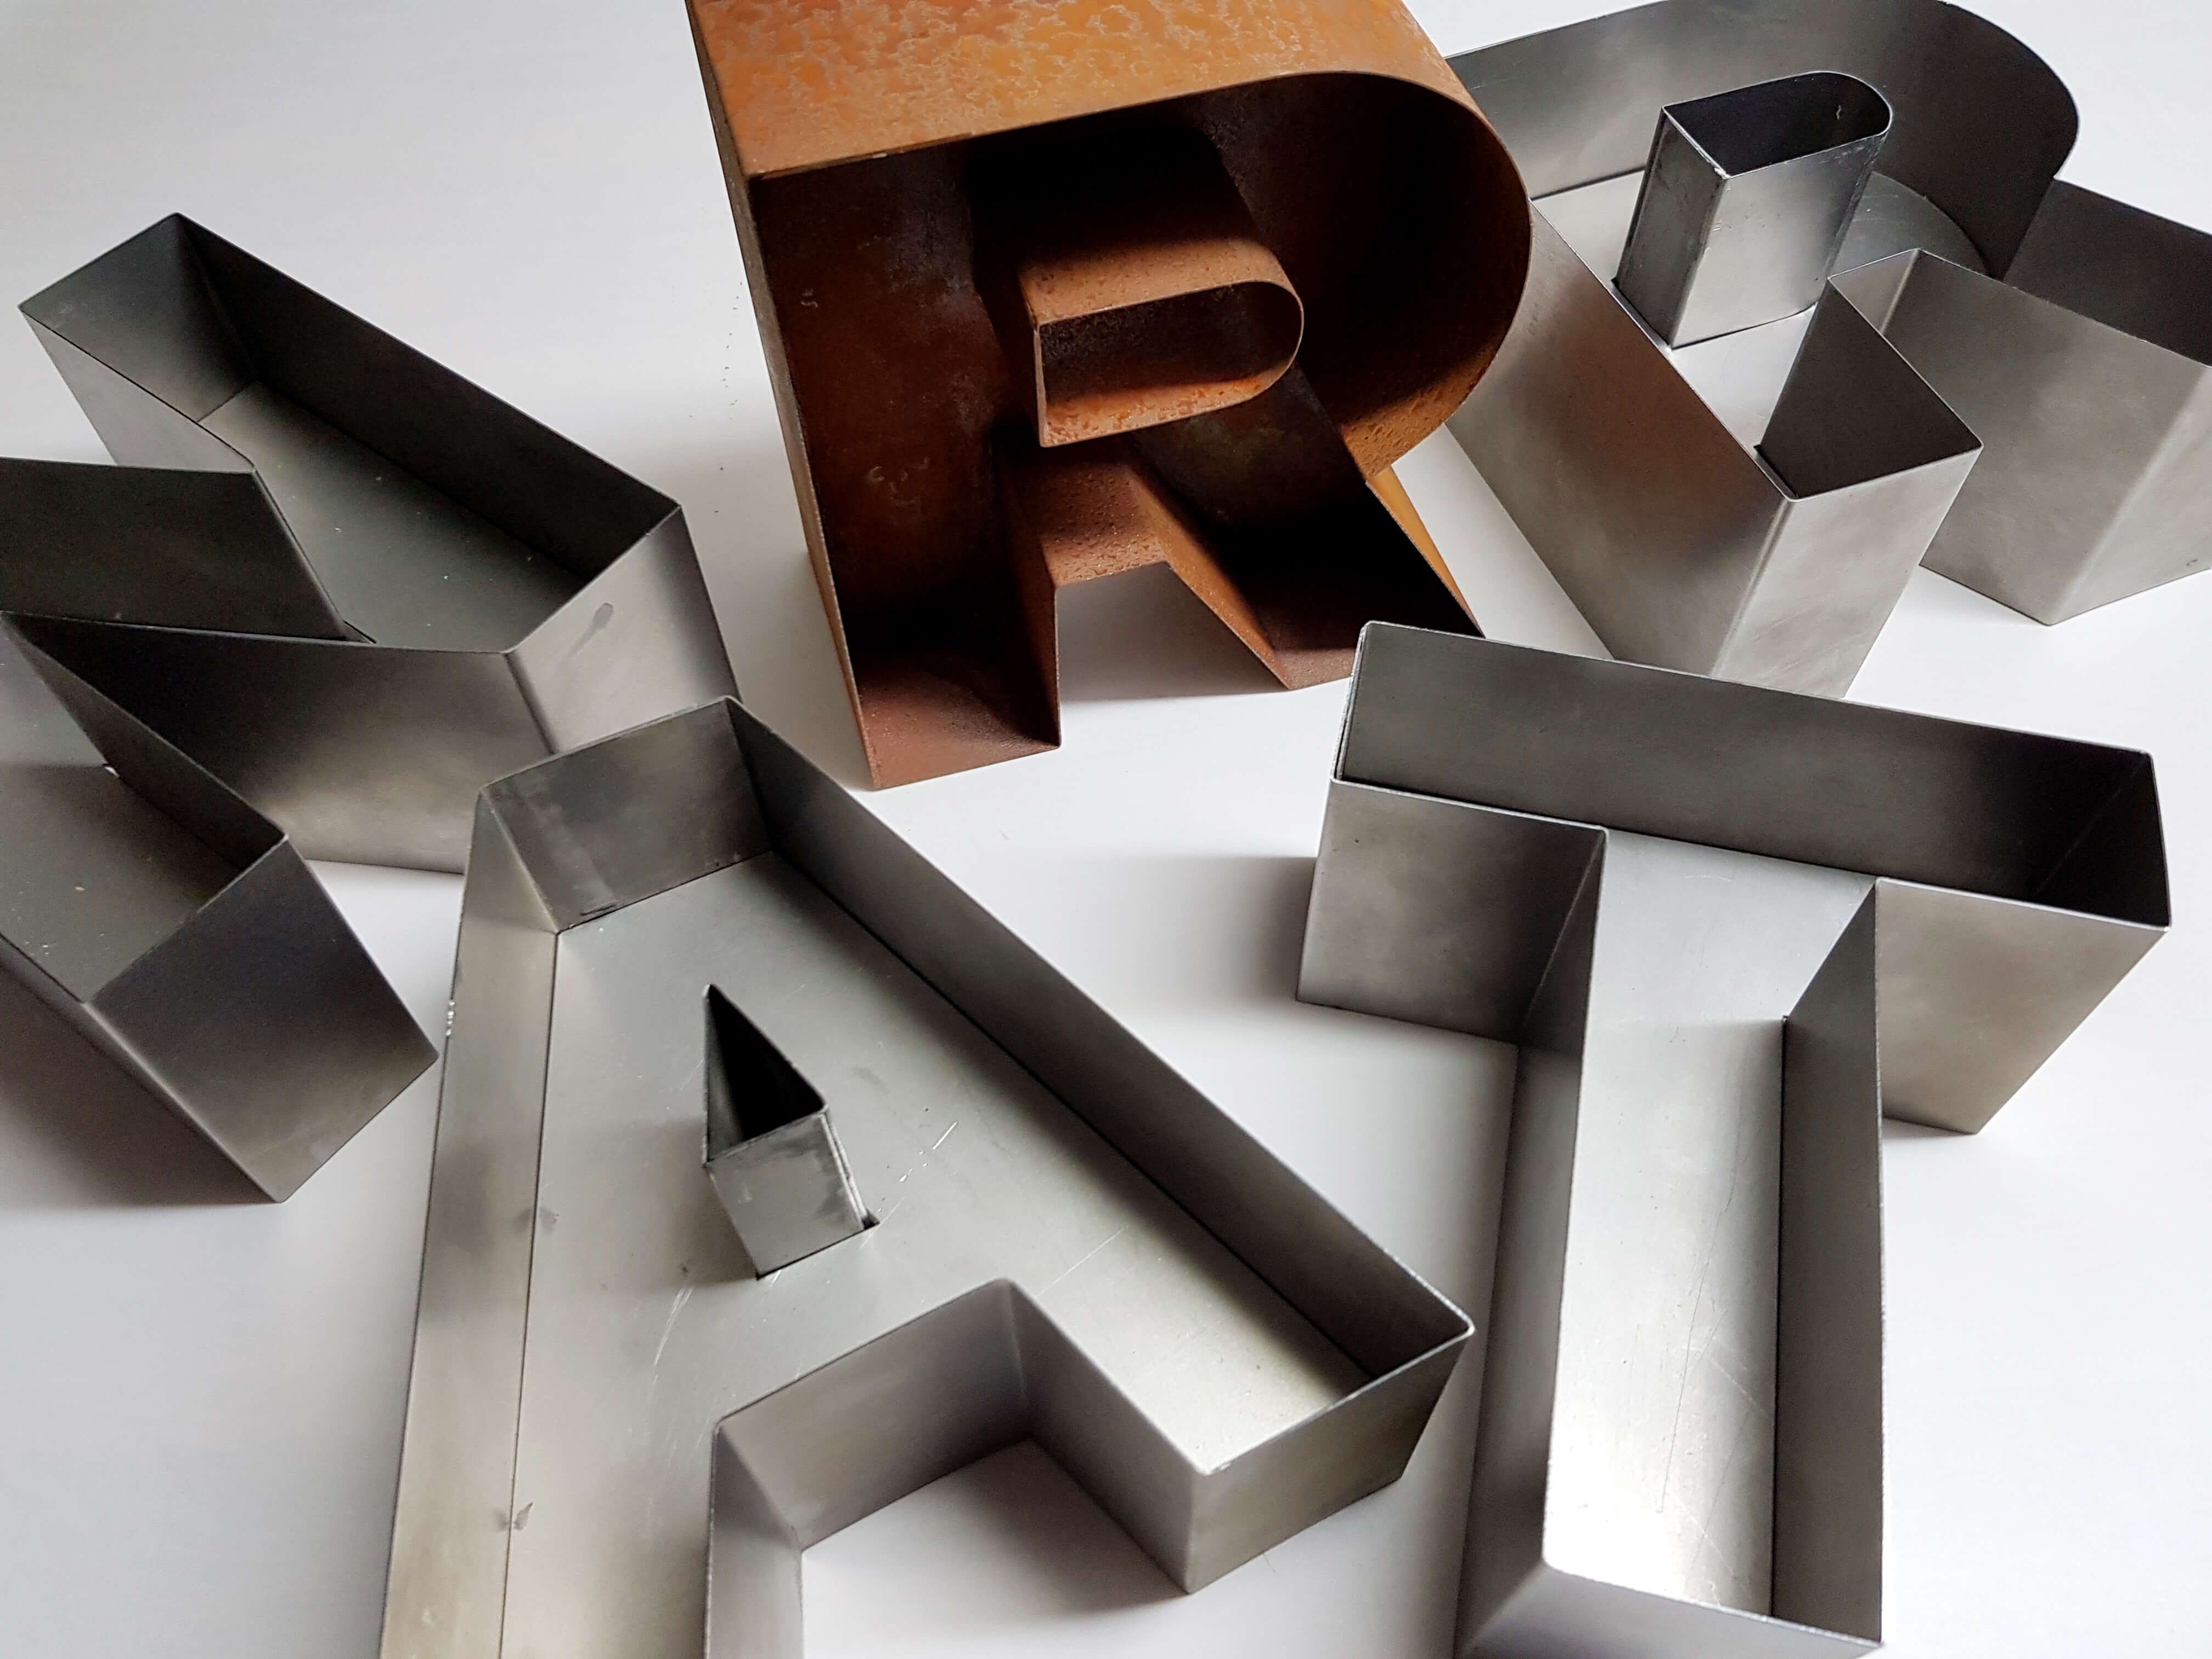 Rusty letters - Rusty sheet metal and metal letters